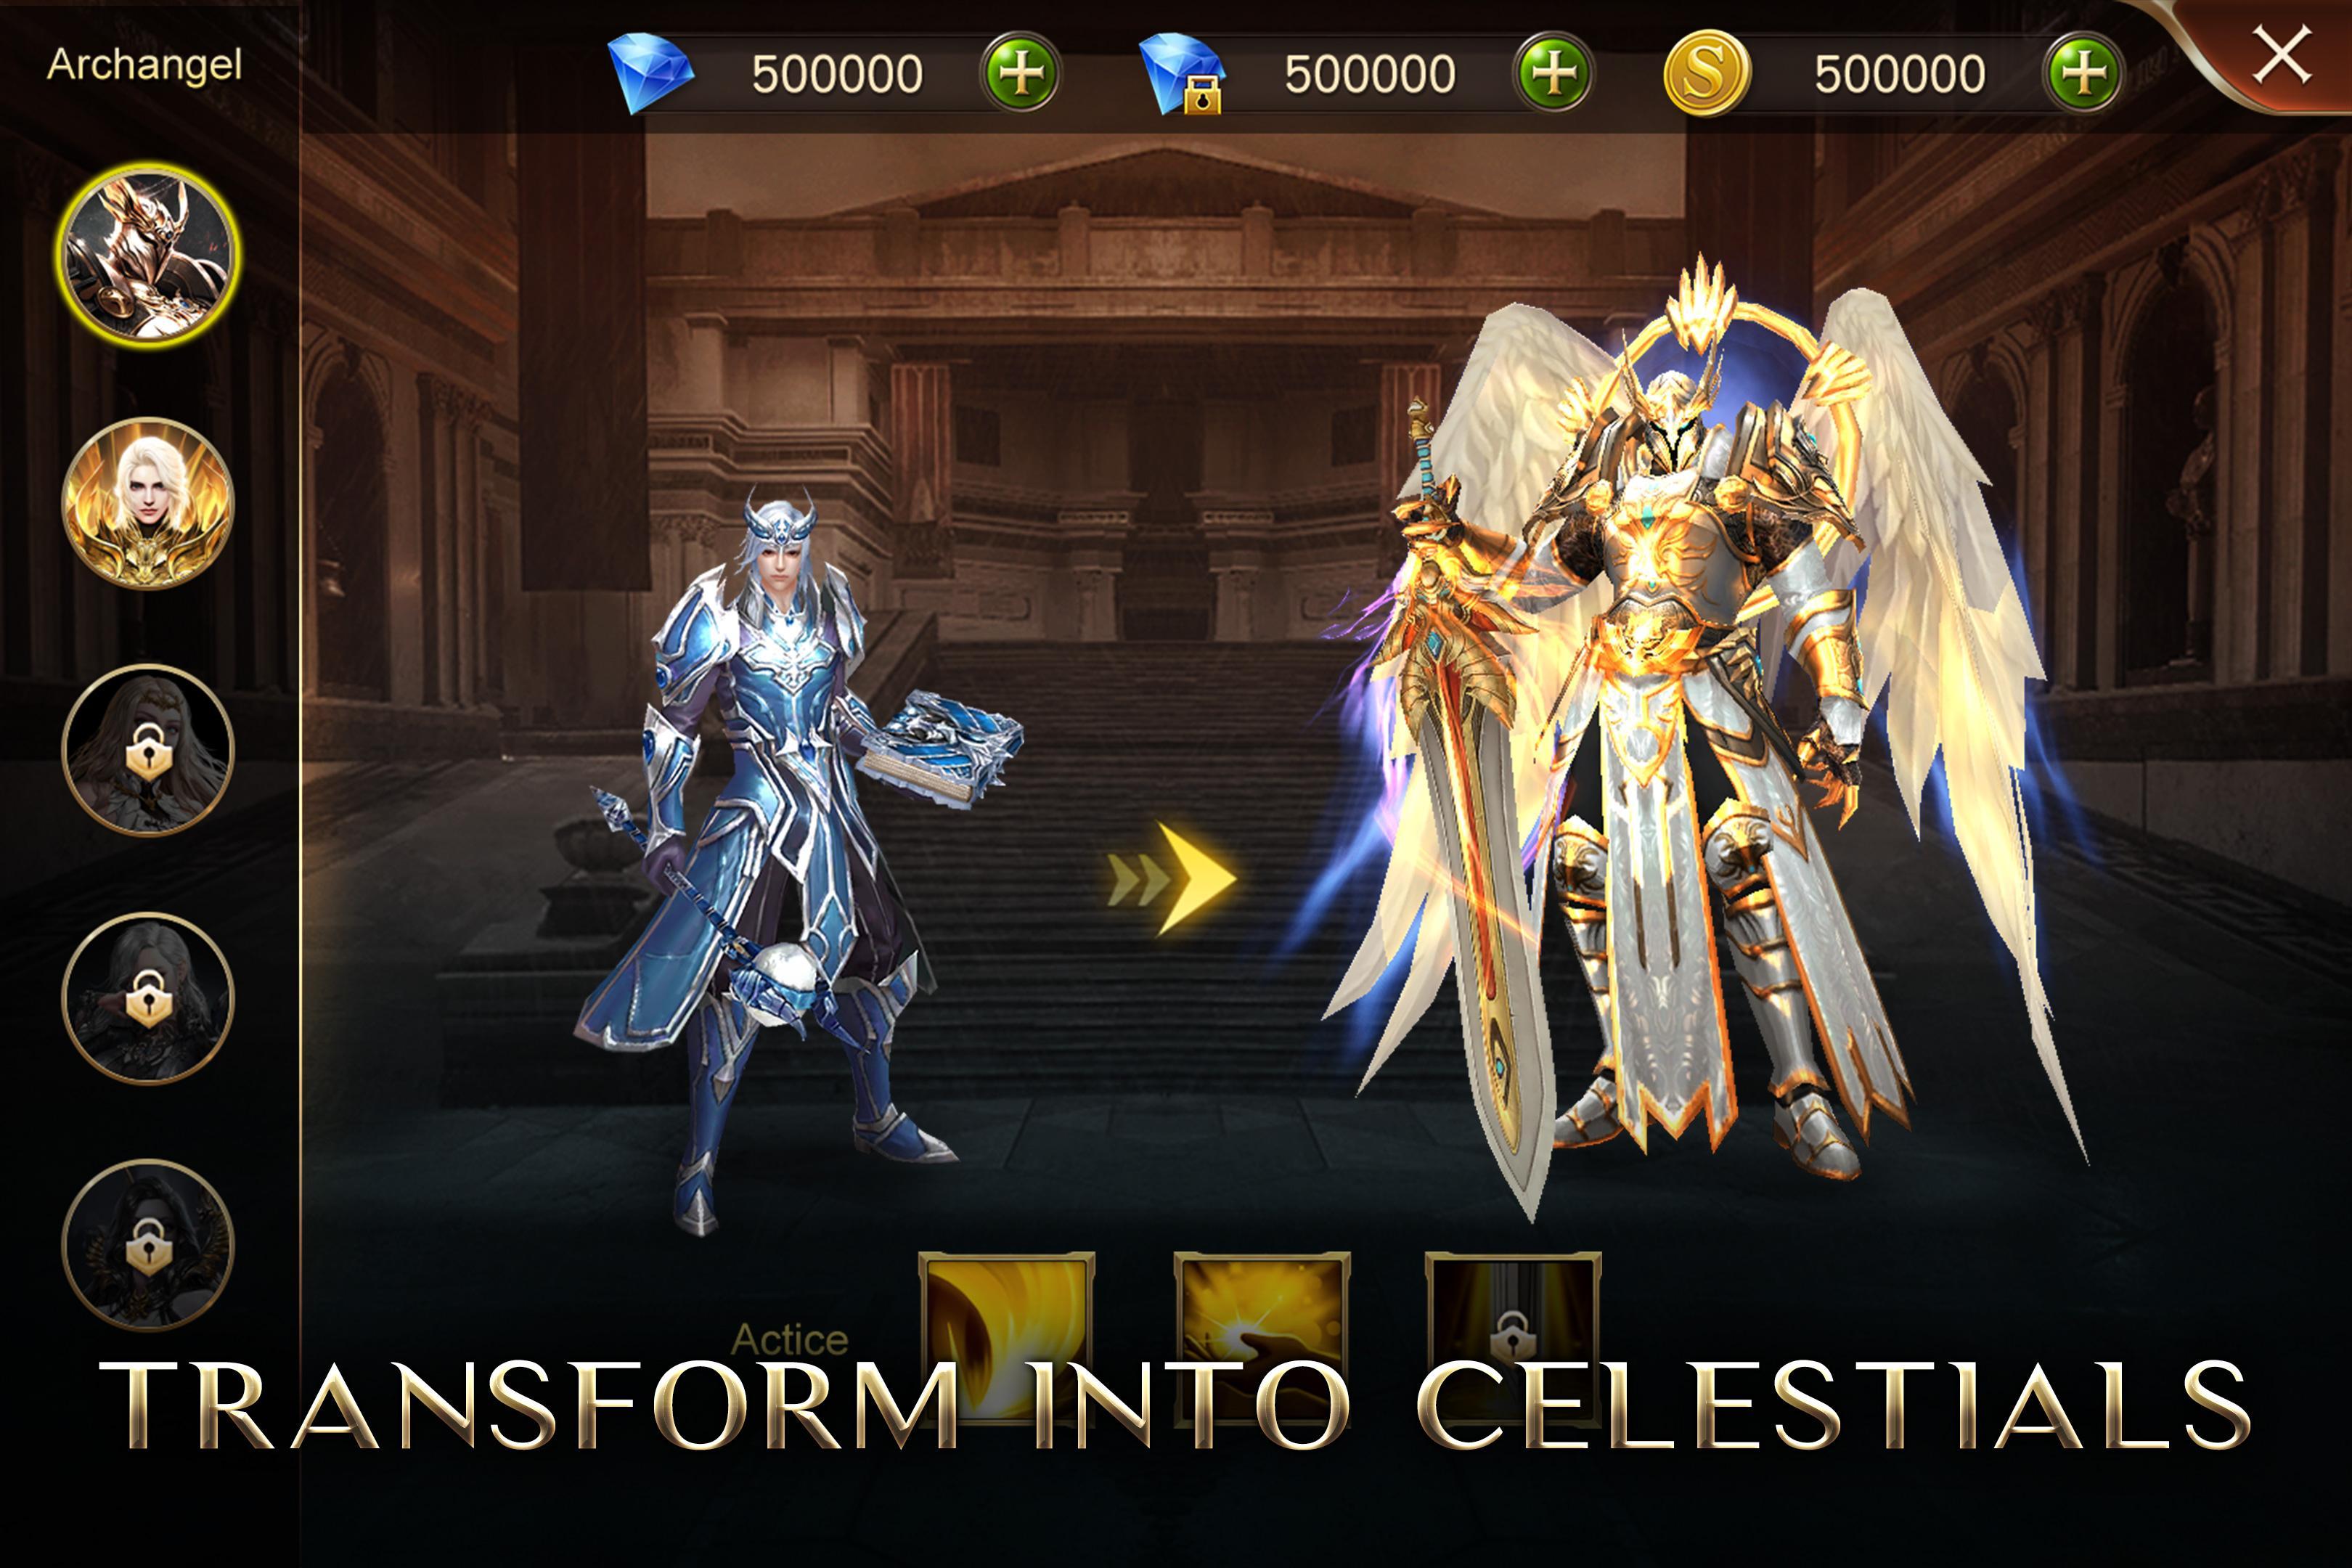 Era of Celestials for Android - APK Download - 